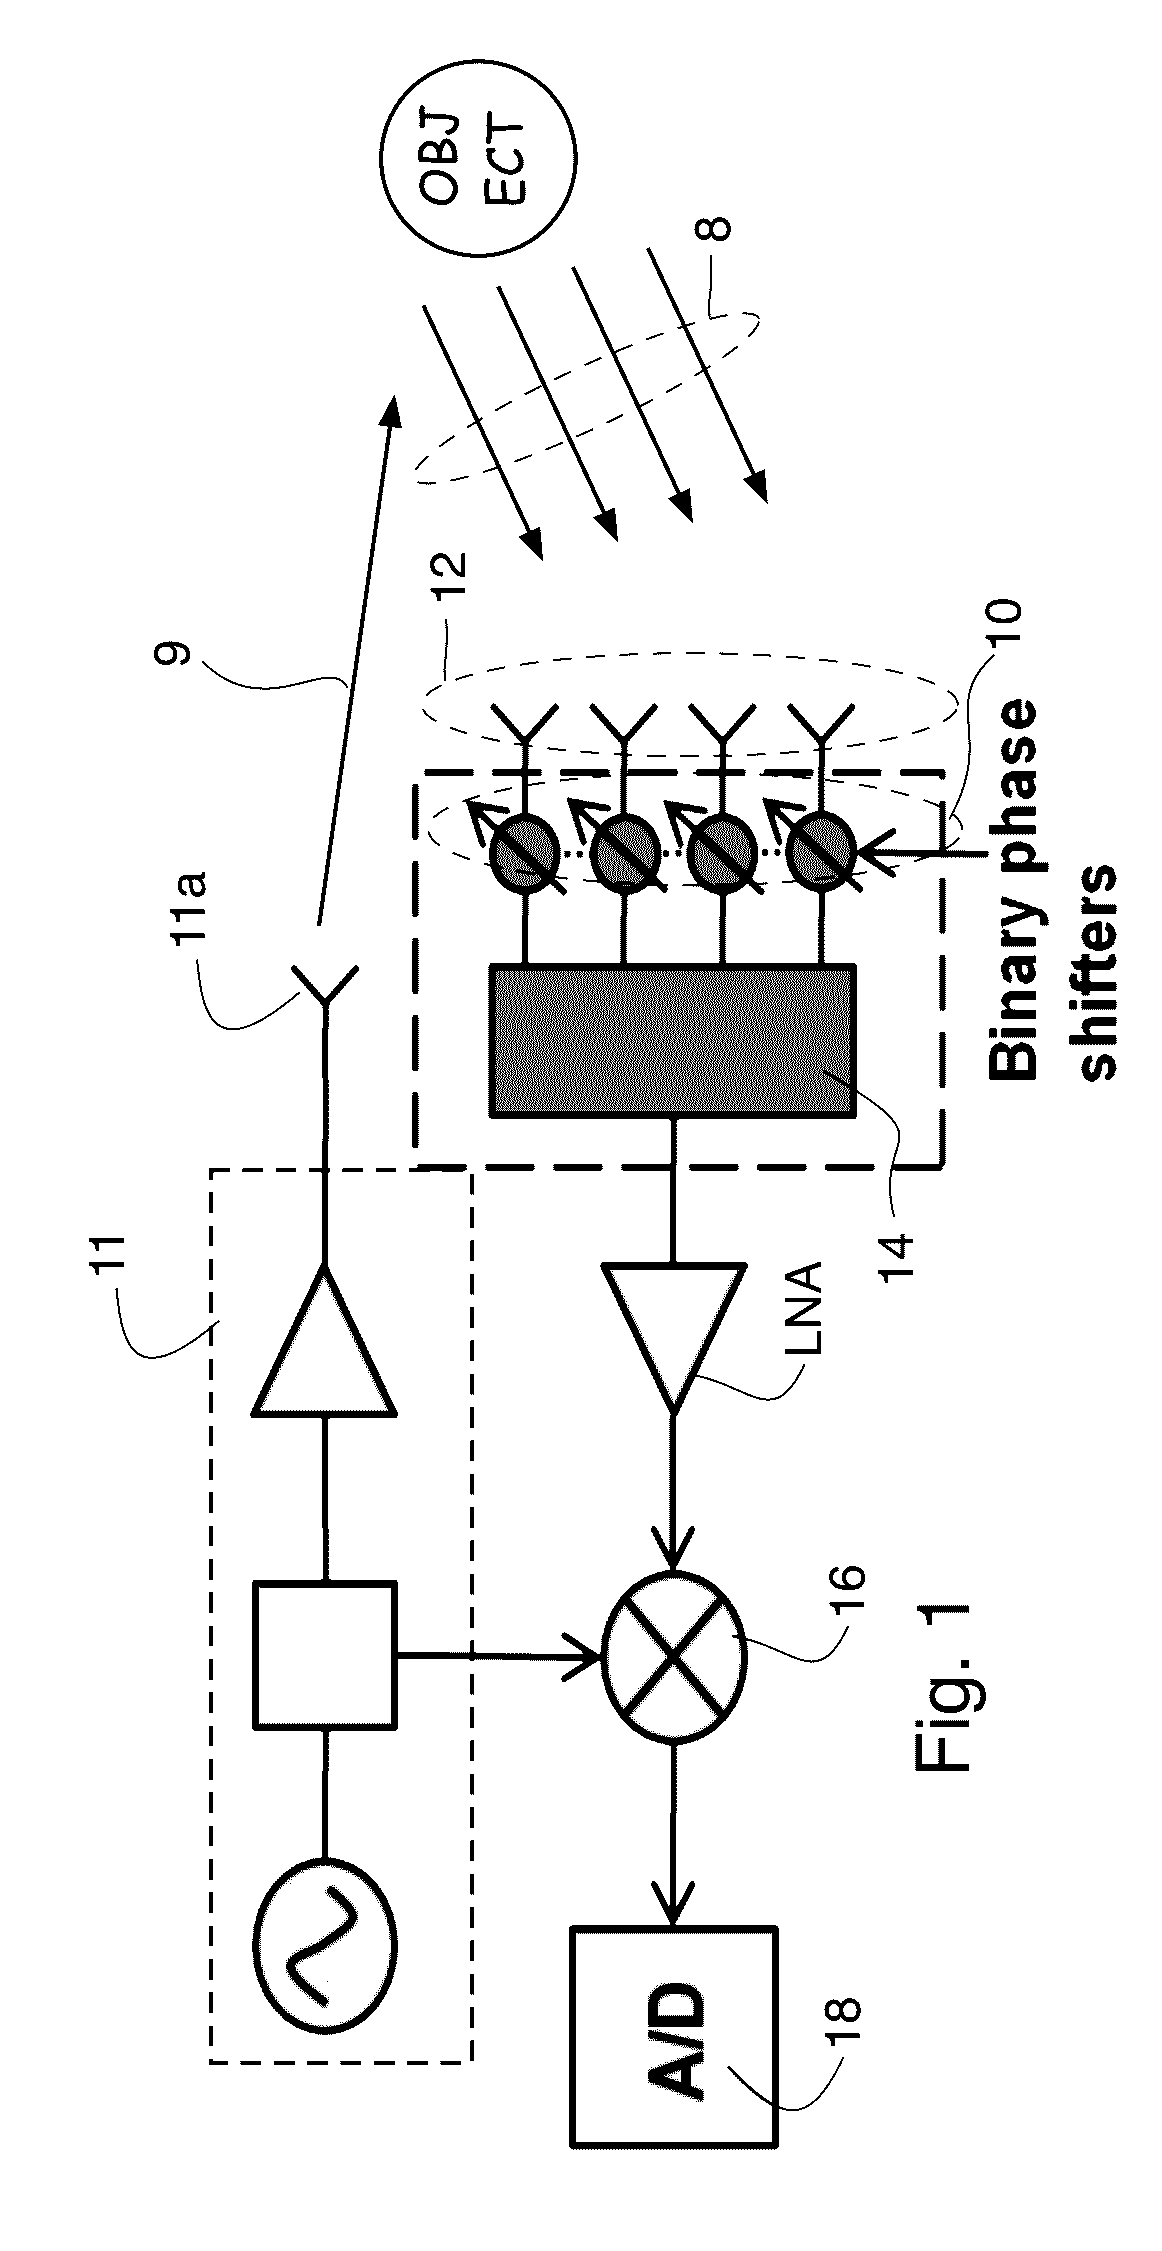 Method and apparatus for processing coded aperture radar (CAR) signals